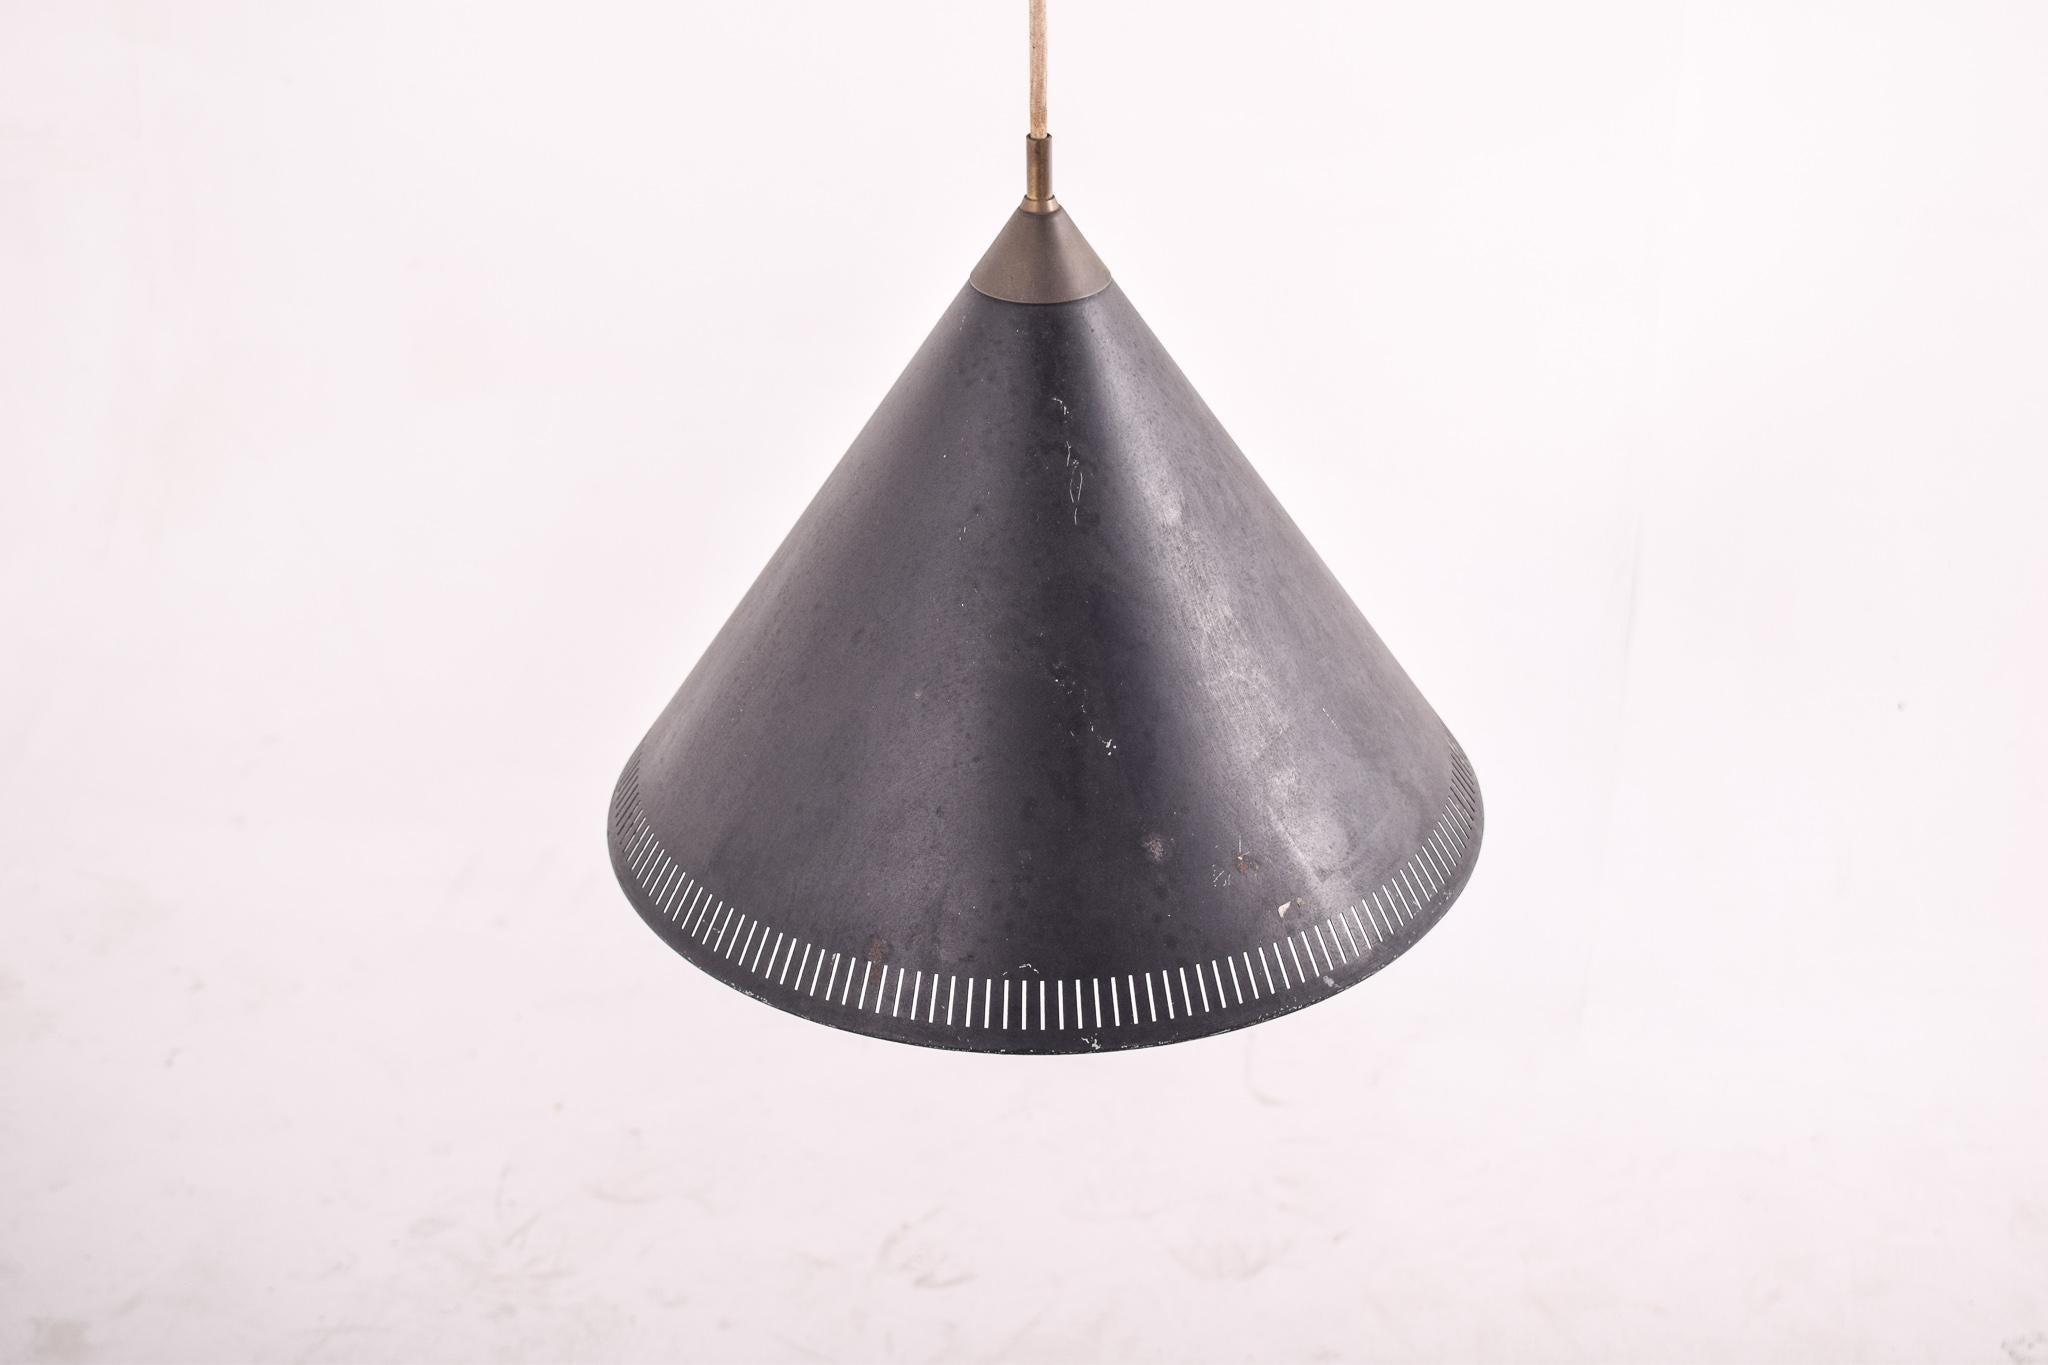 Black cone-shaped light pendant by Bent Karlby for Lyfa. Lyfa stands behind this beauty, which was designed in the 1960s. The cone-shaped design of the lamp gives a very good light. It features perforated metal to allow it to shine beams of light.